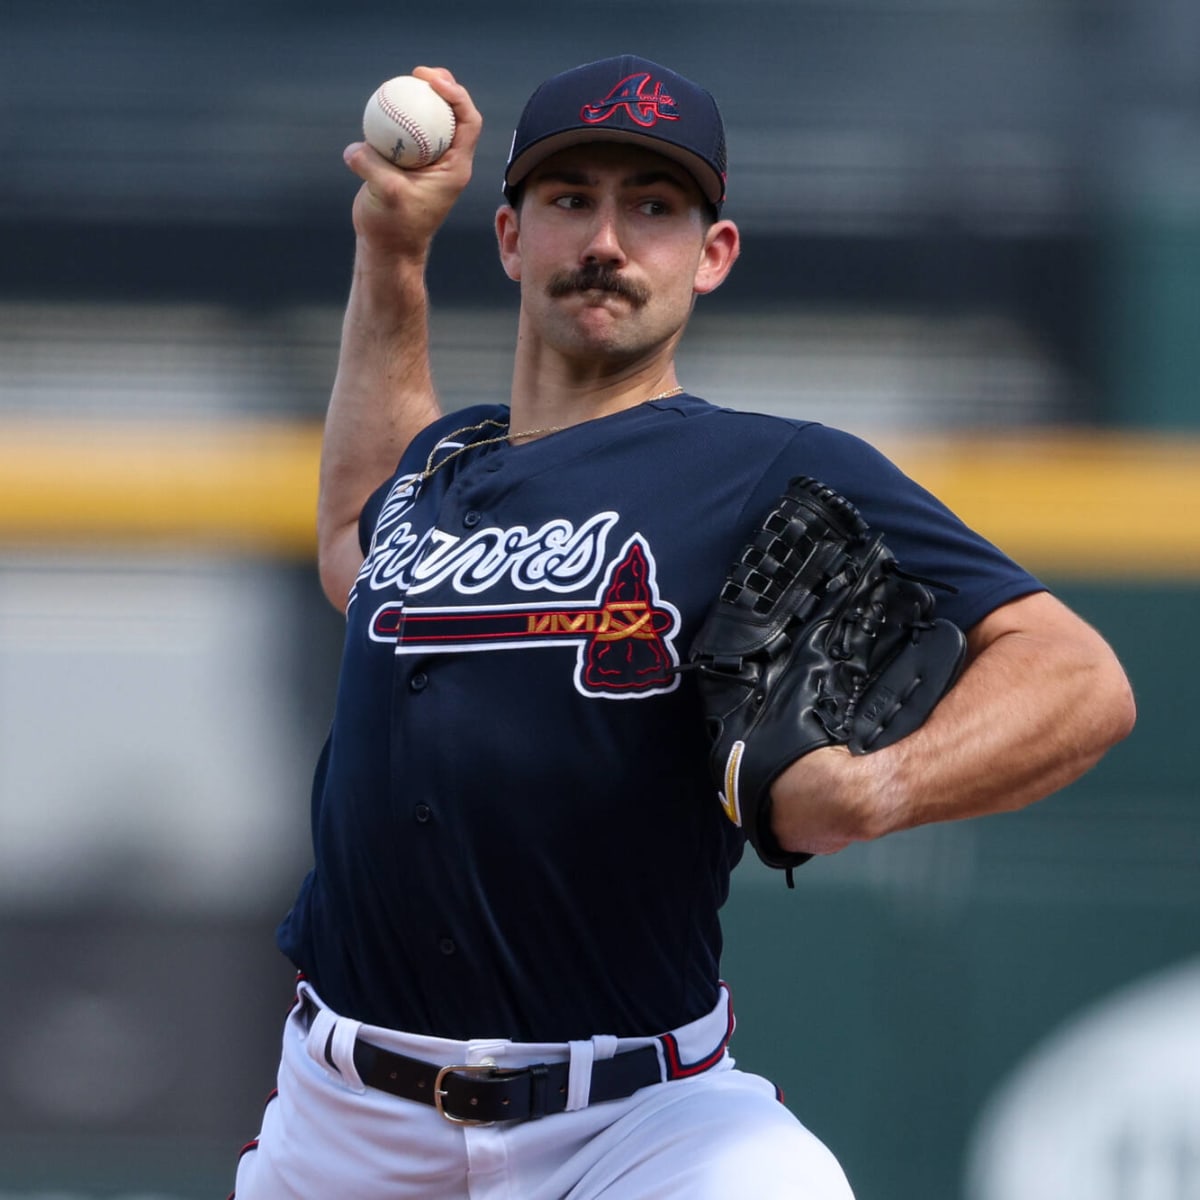 Predicting the 2023 stats of each Braves player — Spencer Strider